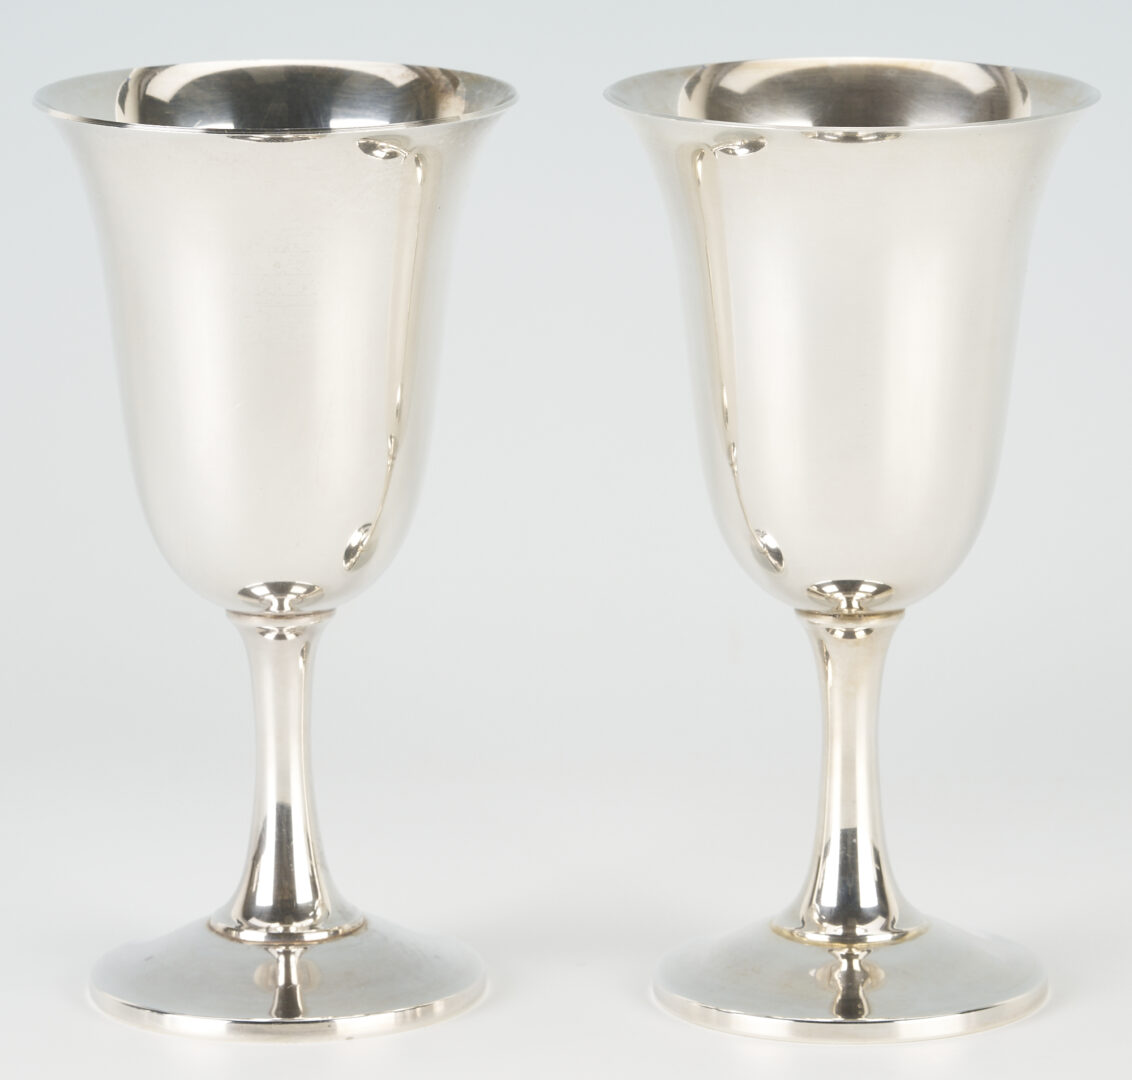 Lot 291: 6 Wallace Sterling Goblets & 8 Sterling Tall Tumblers or Cups, 14 items